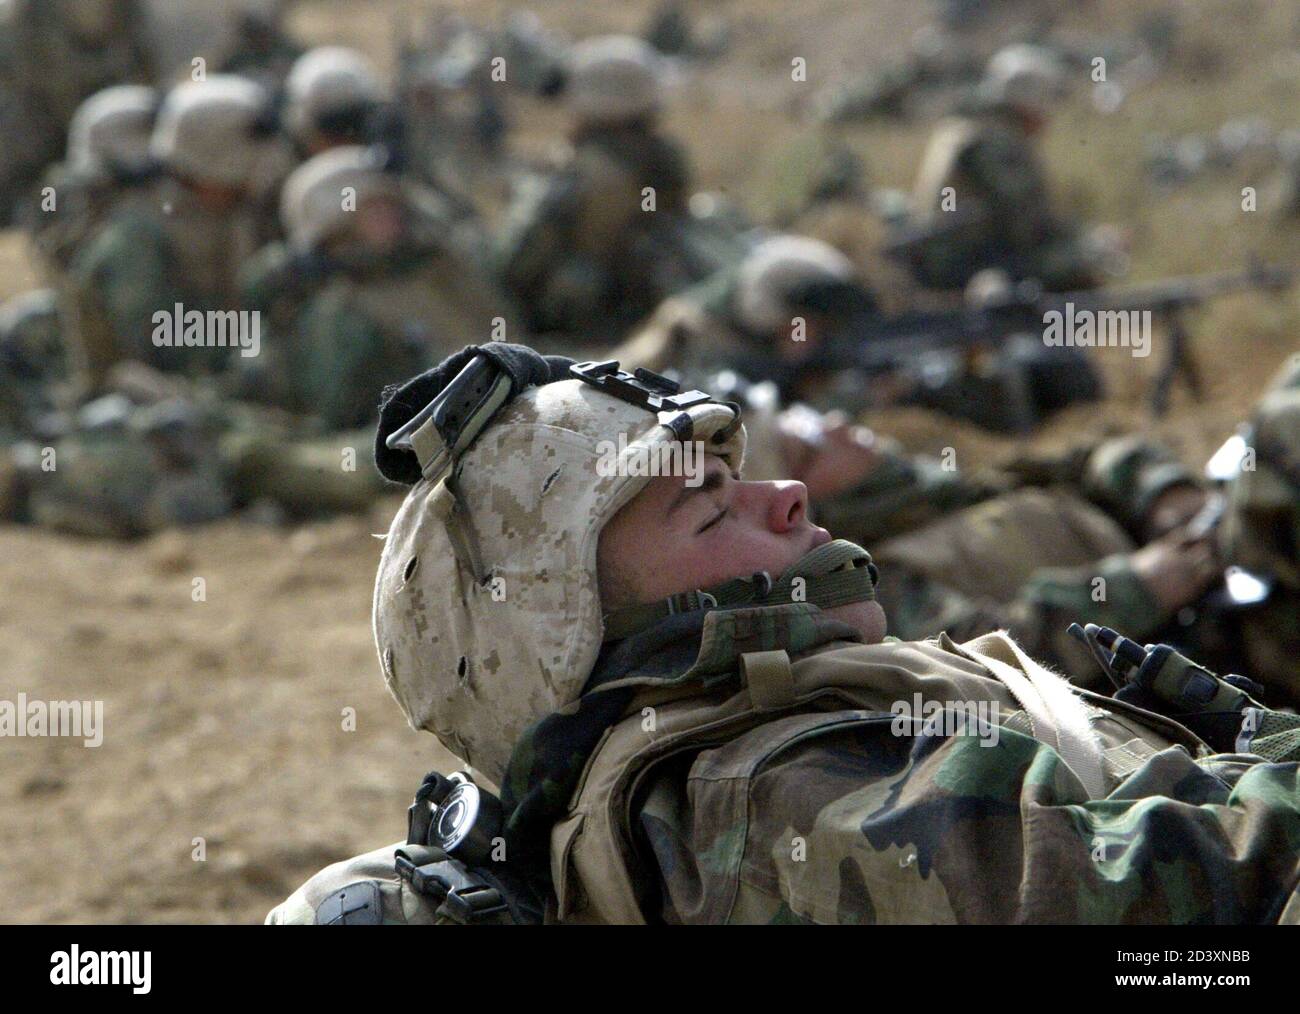 A U.S. Marine from Lima Company, a part of the 7th Marine Regiment, takes a short break before a final push on the road South-East from the Iraqi capital Baghdad on April 5, 2003. [Iraq said it had beaten off a U.S. attack on its positions near Baghdad overnight as the thunder of repeated explosions reverberated through the city into Saturday. U.S. military sources said at least 20 Abrams battle tanks and 10 Bradley fighting vehicles had pushed into southern Baghdad on Saturday in the closest land advance to the heart of the city.] Stock Photo